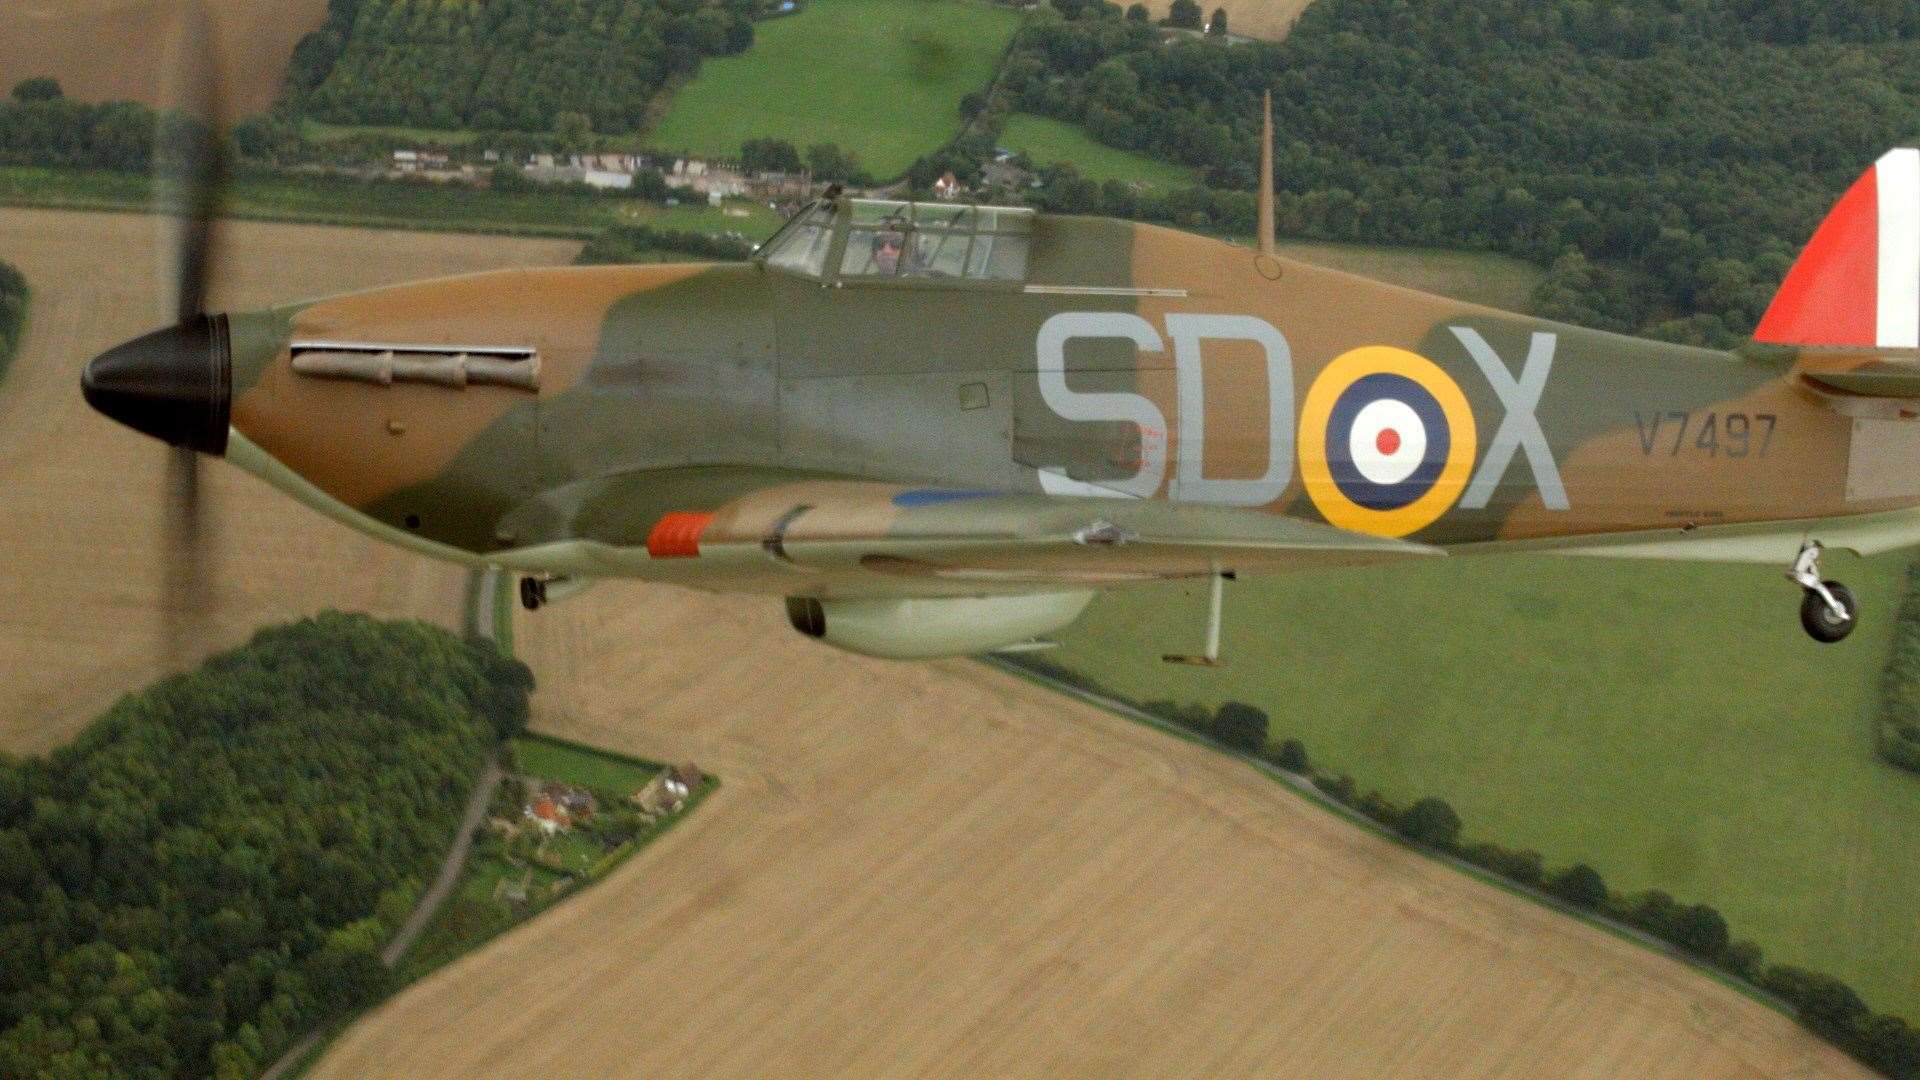 The newly restored Mk1 Hawker Hurricane takes to the air. Picture: SWNS